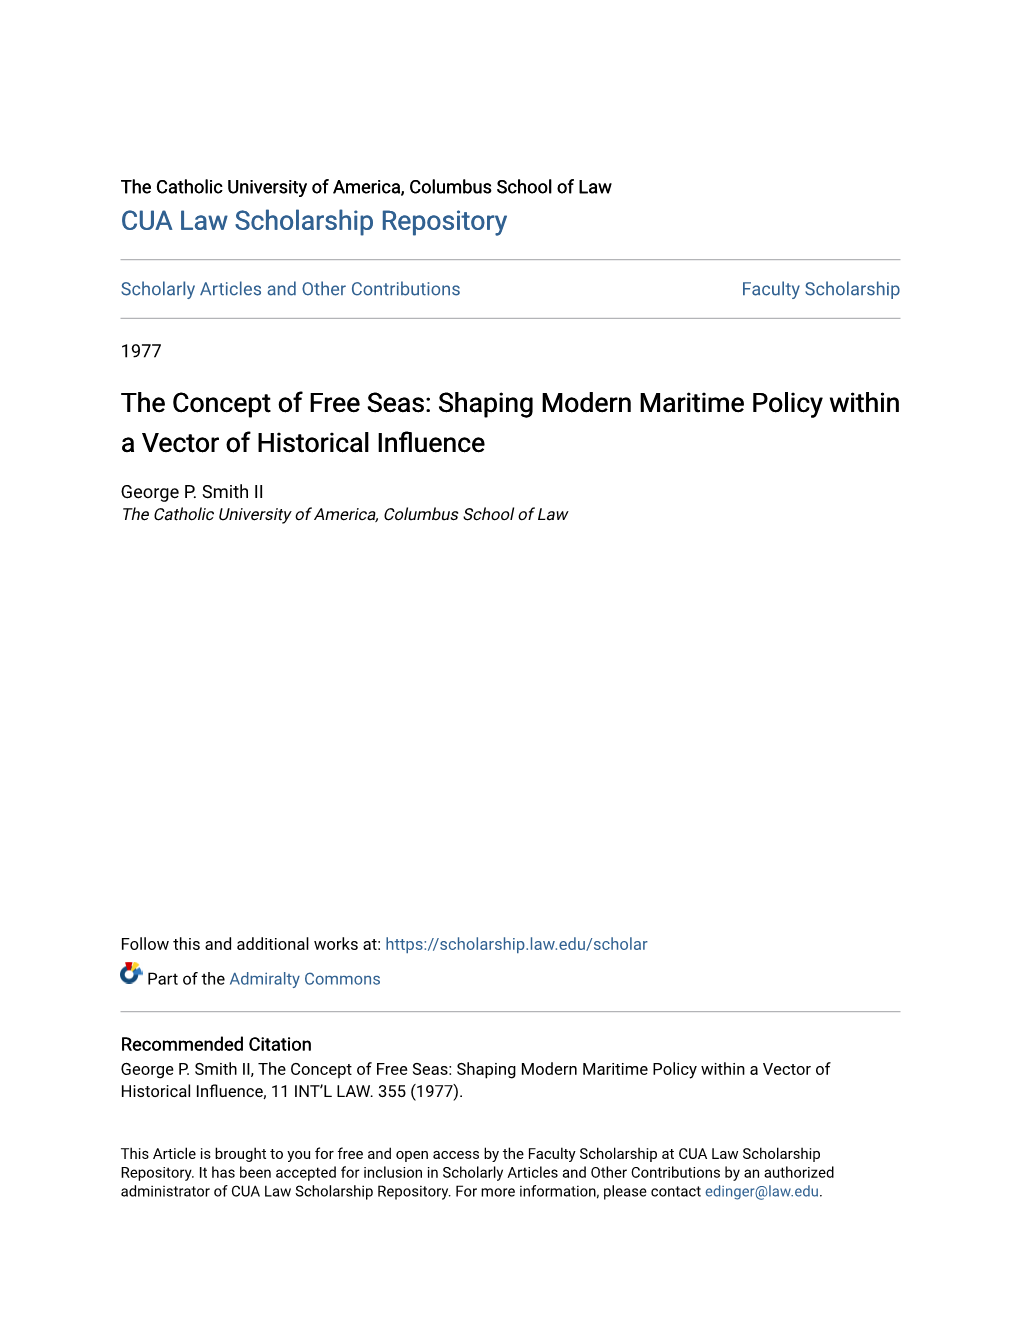 The Concept of Free Seas: Shaping Modern Maritime Policy Within a Vector of Historical Influence